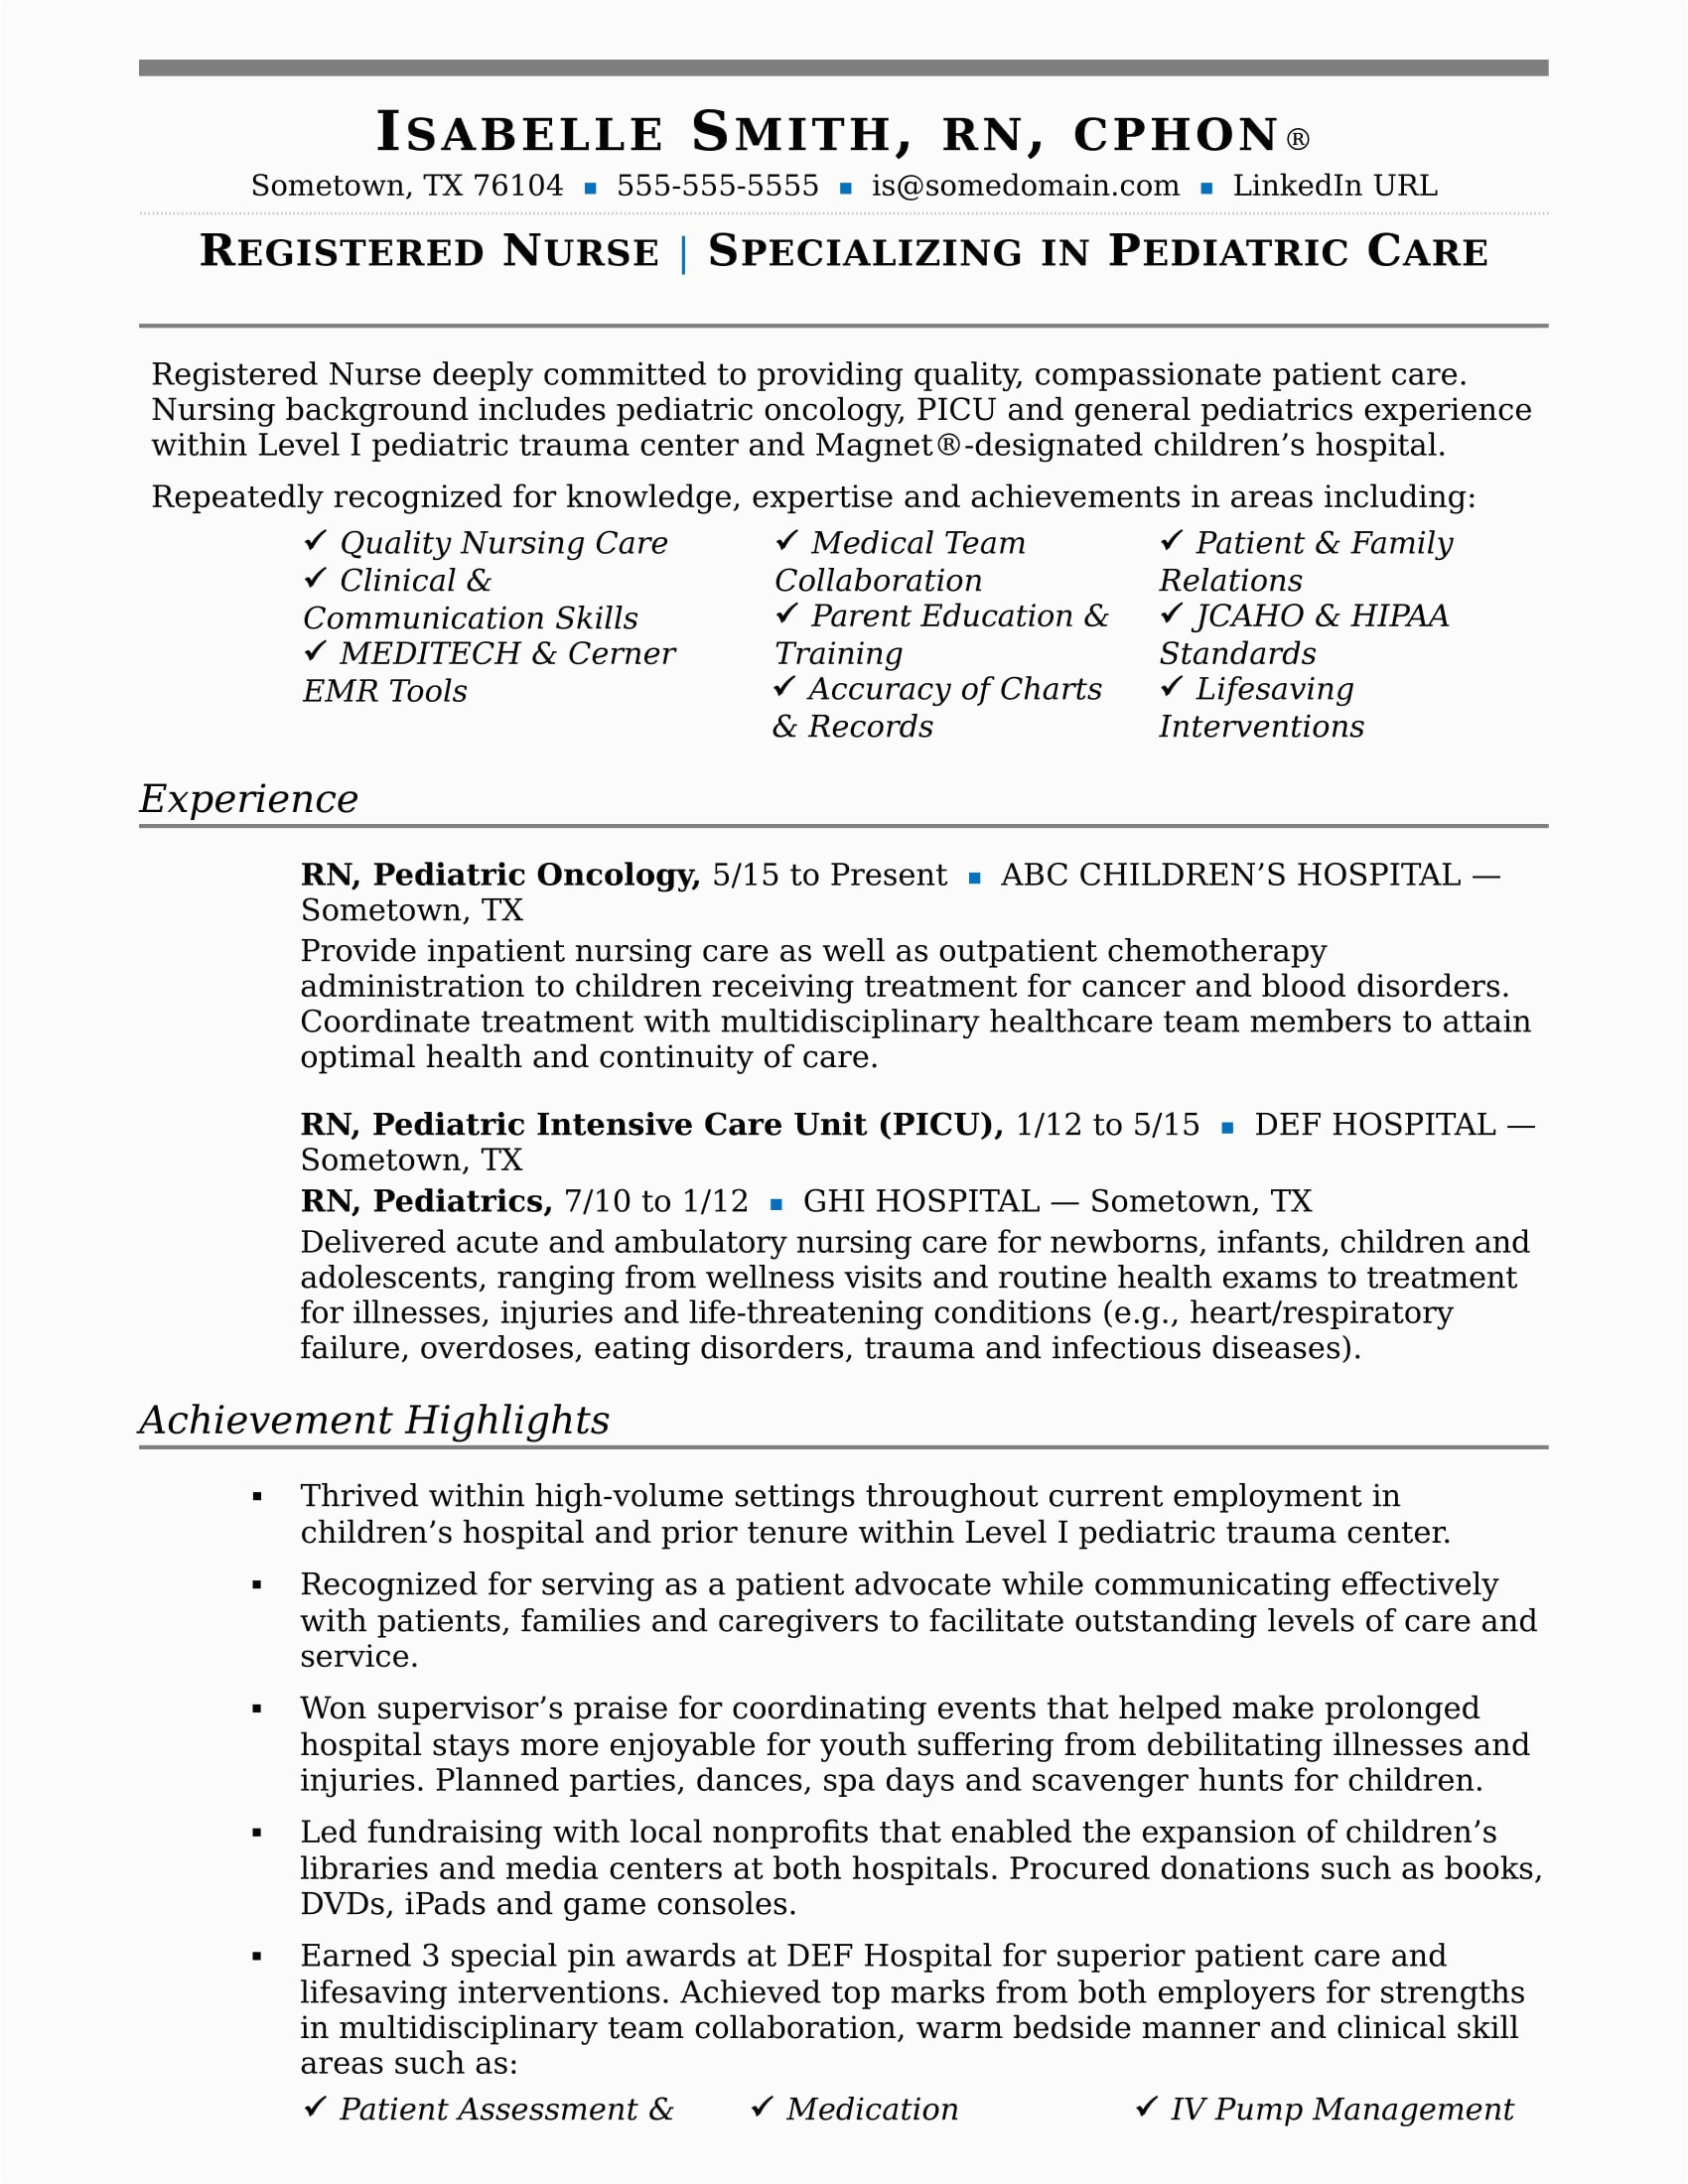 Sample Resume for Nurses with Experience In India Nurse Resume Sample